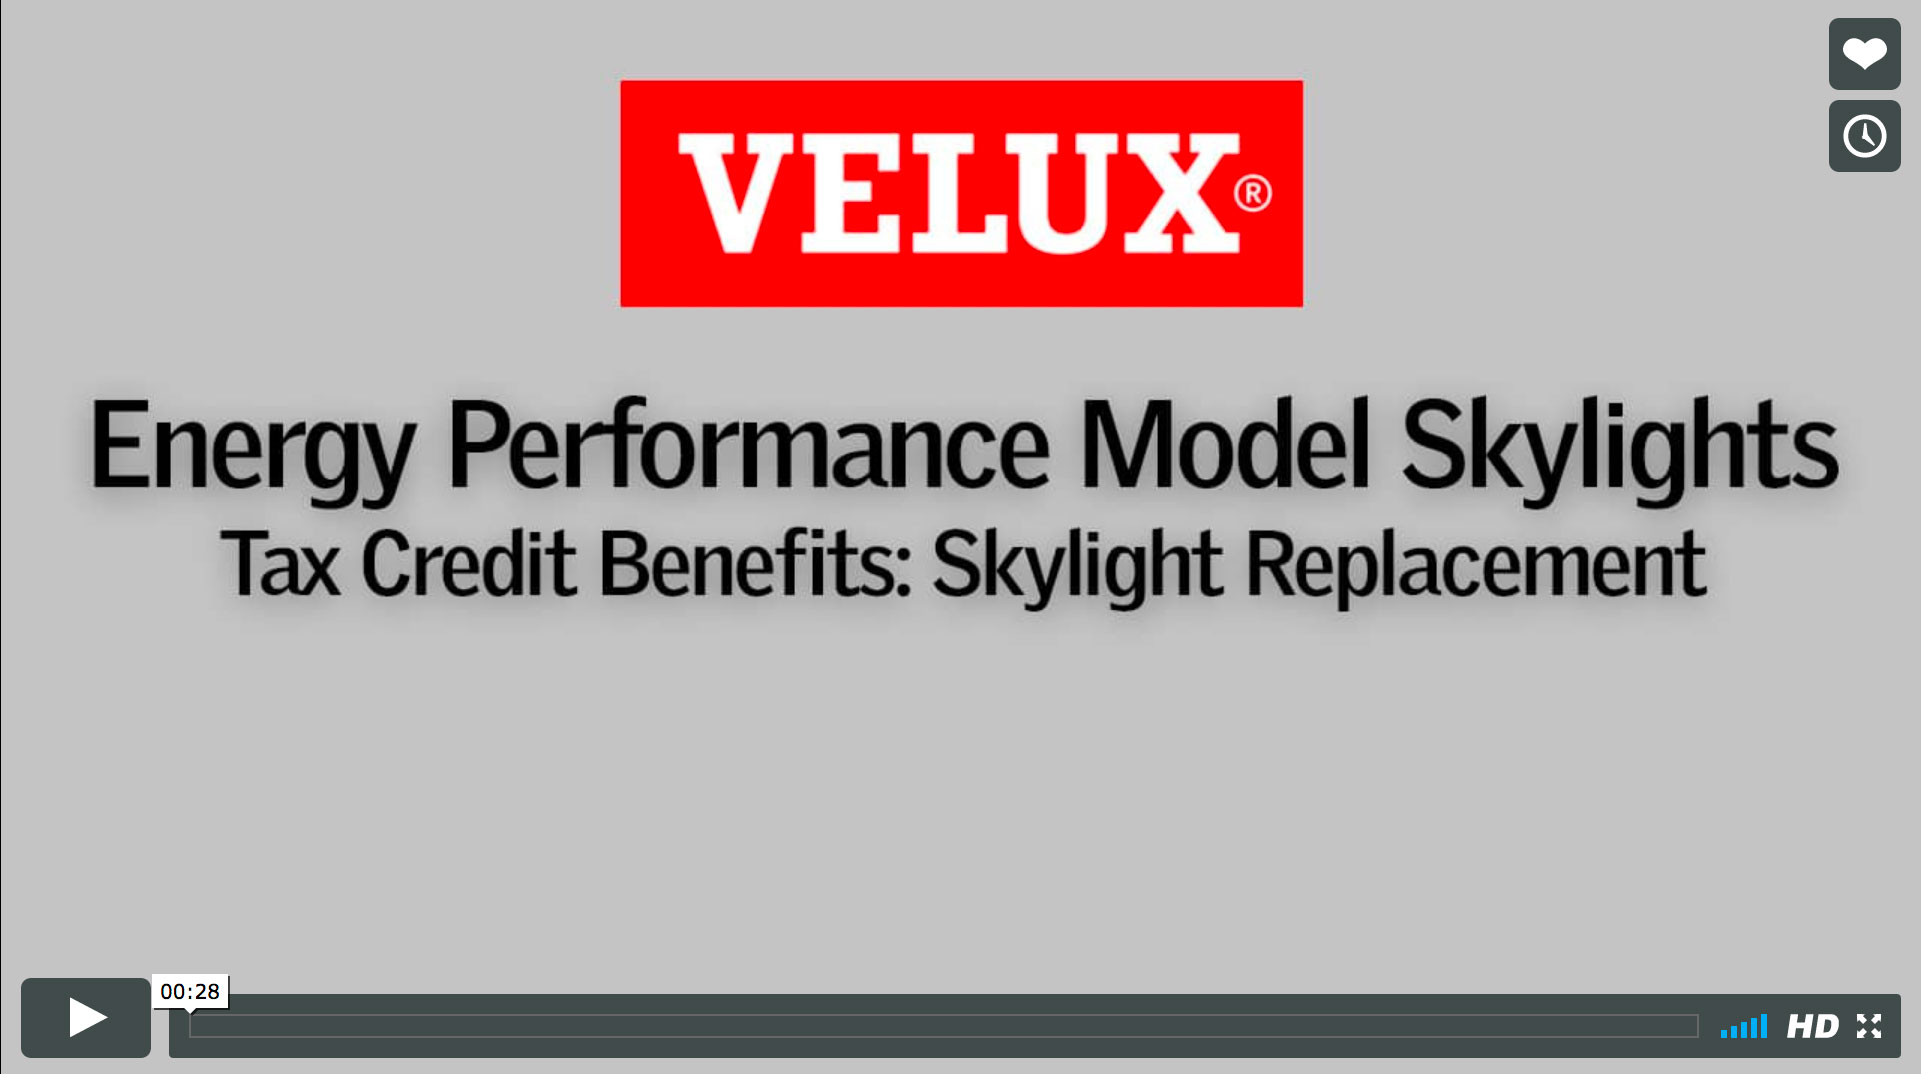 Tax credit benefit for skylight replacements 